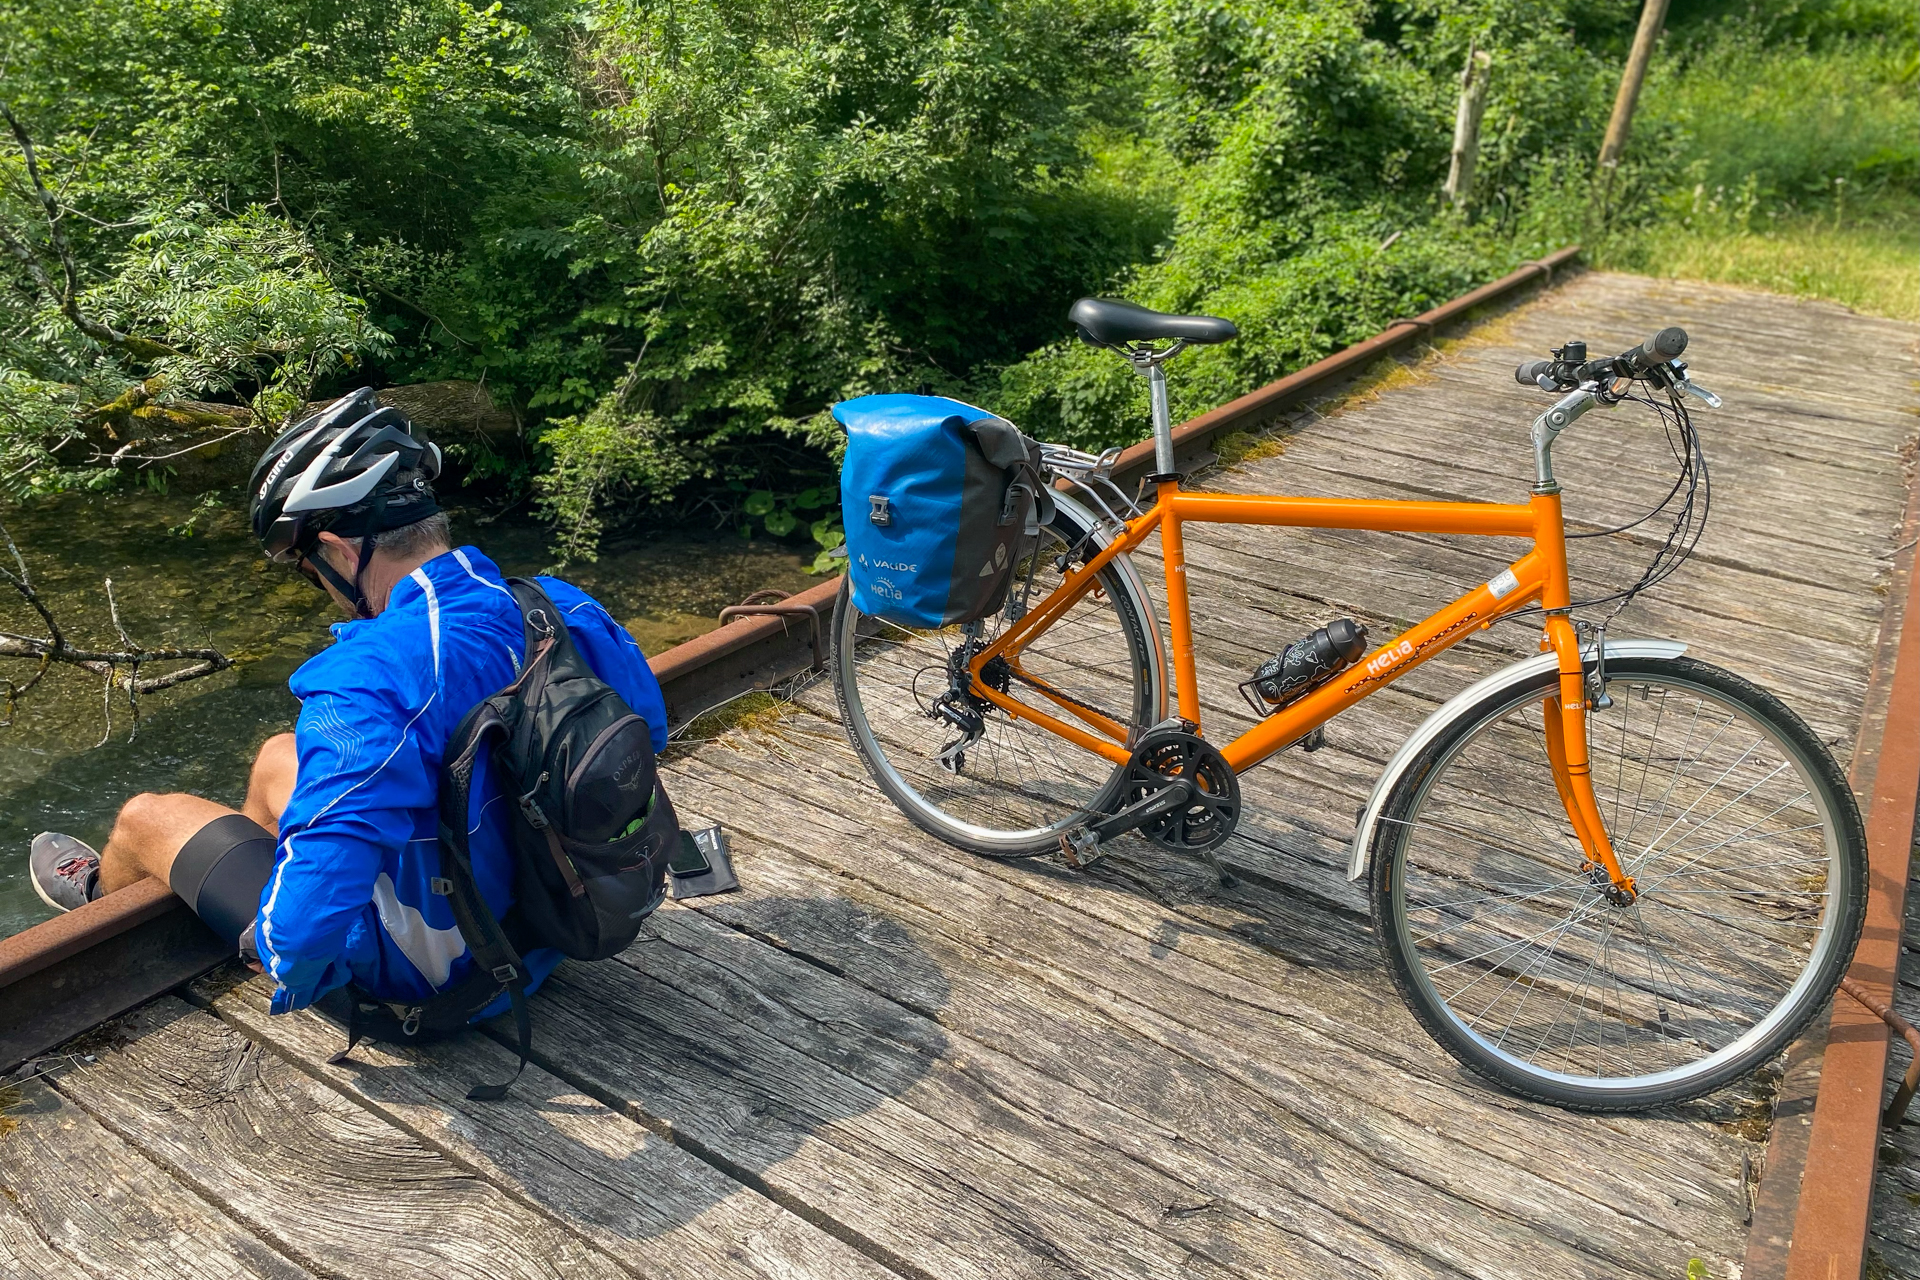 A man sits with his legs daggling over a bridge while an orange bike stands across the bridge.